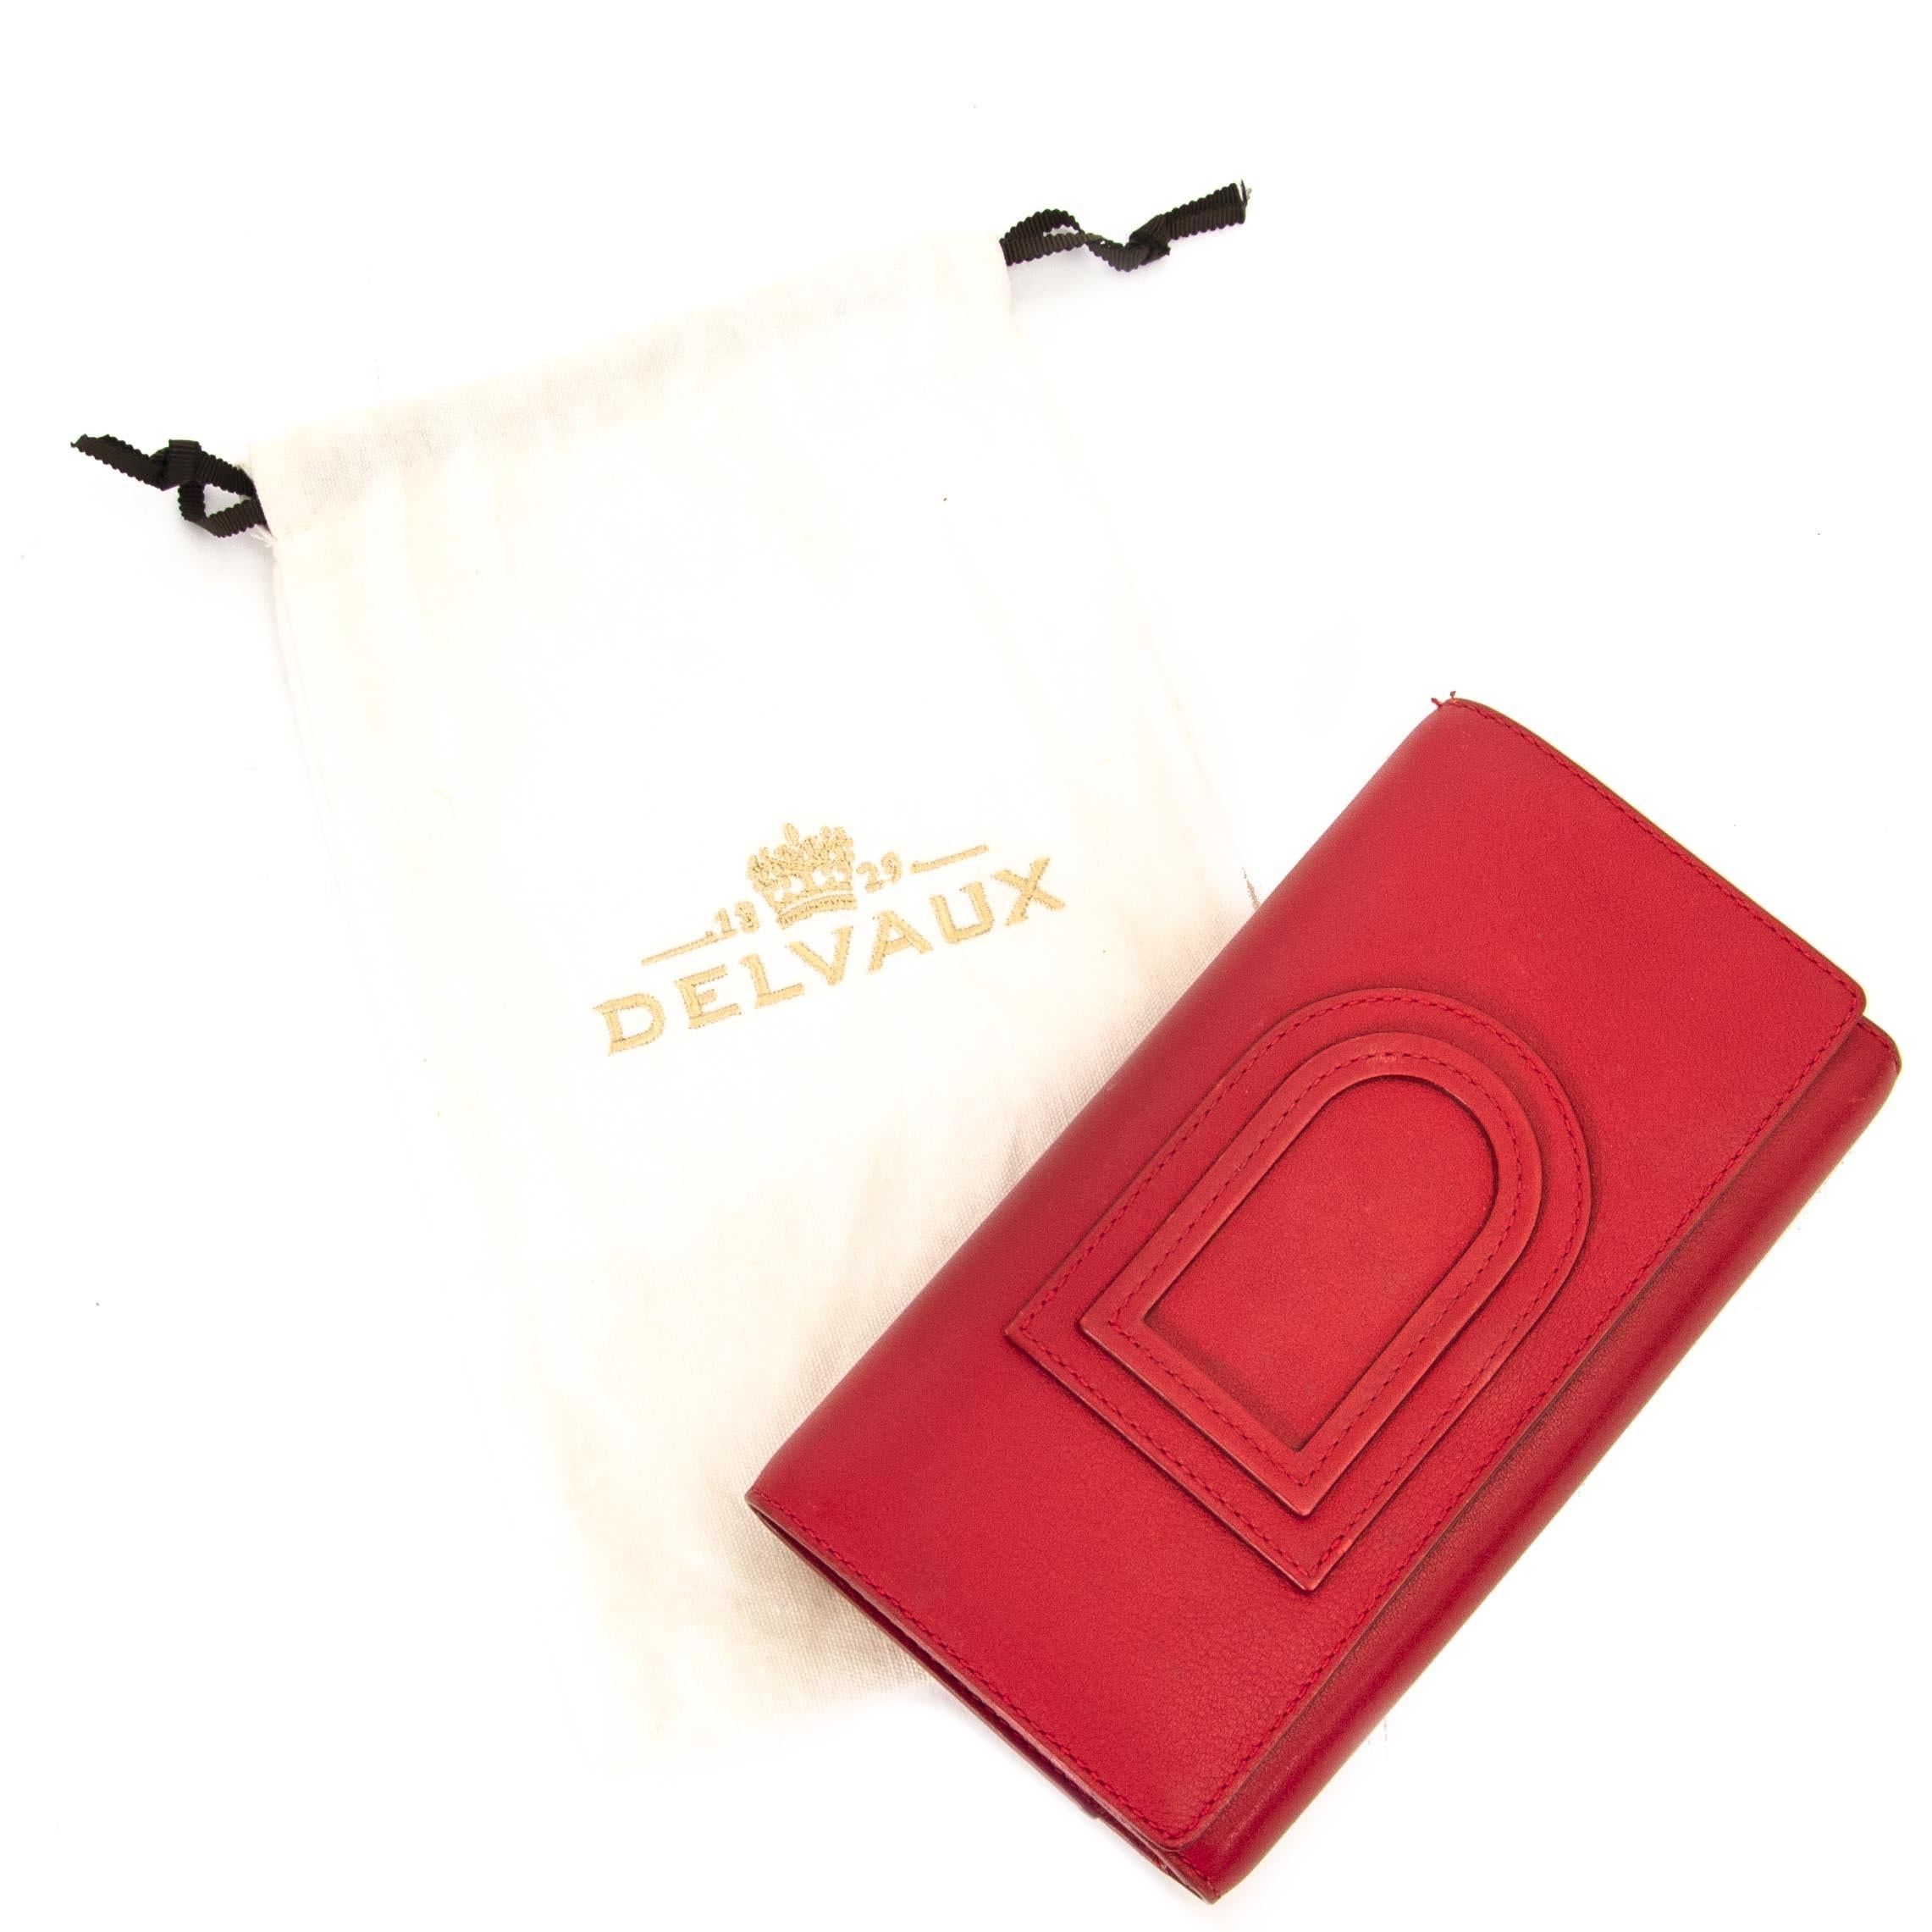 Good preloved condition

Delvaux Lipstck Red Trifold Wallet

This trifold wallet comes in a lovely bright red color and is crafted out of a soft smooth leather. 
The wallet opens with a push lock button. The inside features 12 card slots, a zip